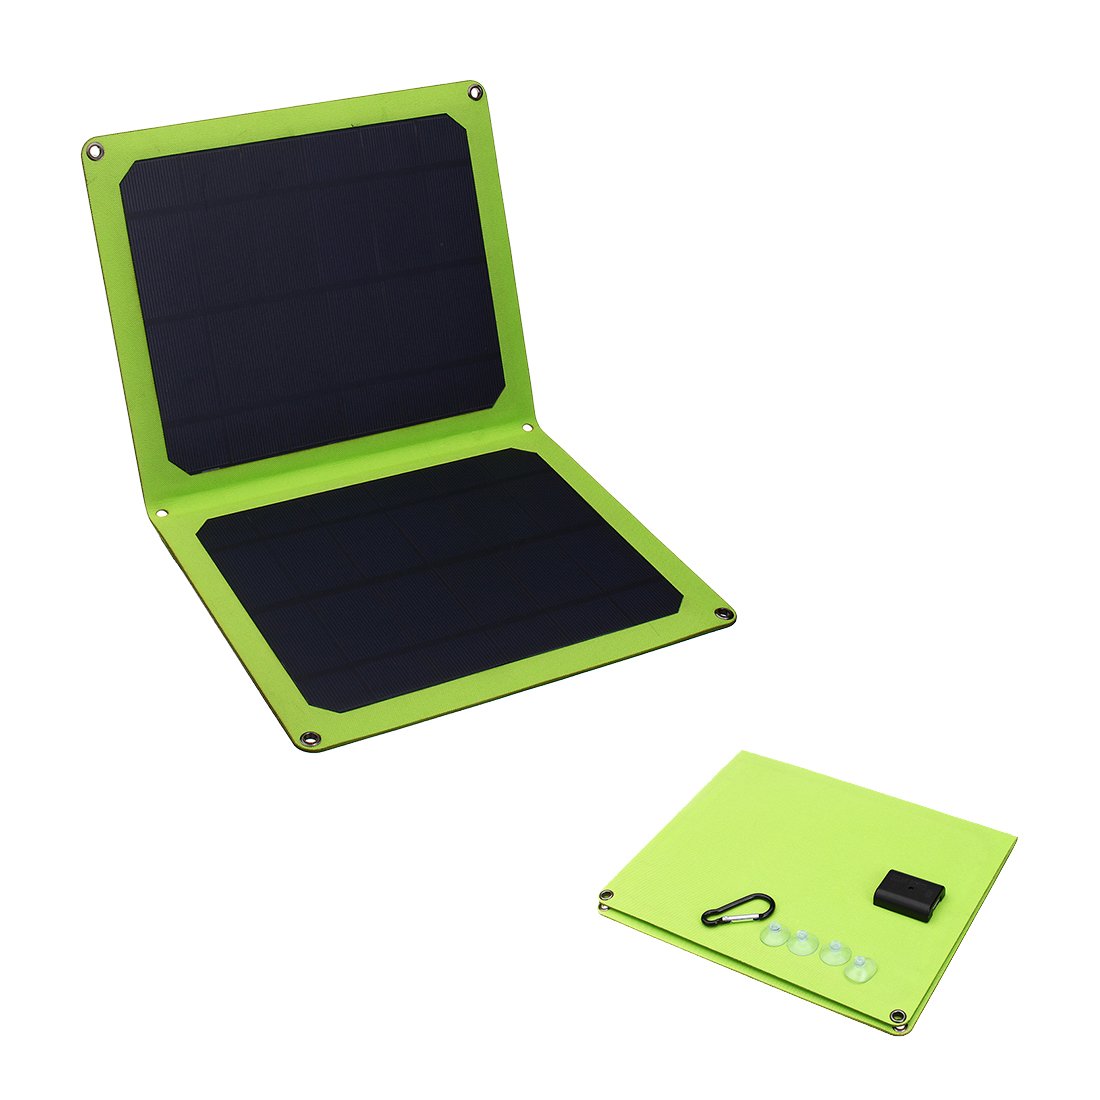 5V 14W Portable Folding Single Crystal Solar Panel with USB Socket for Outdoor 2